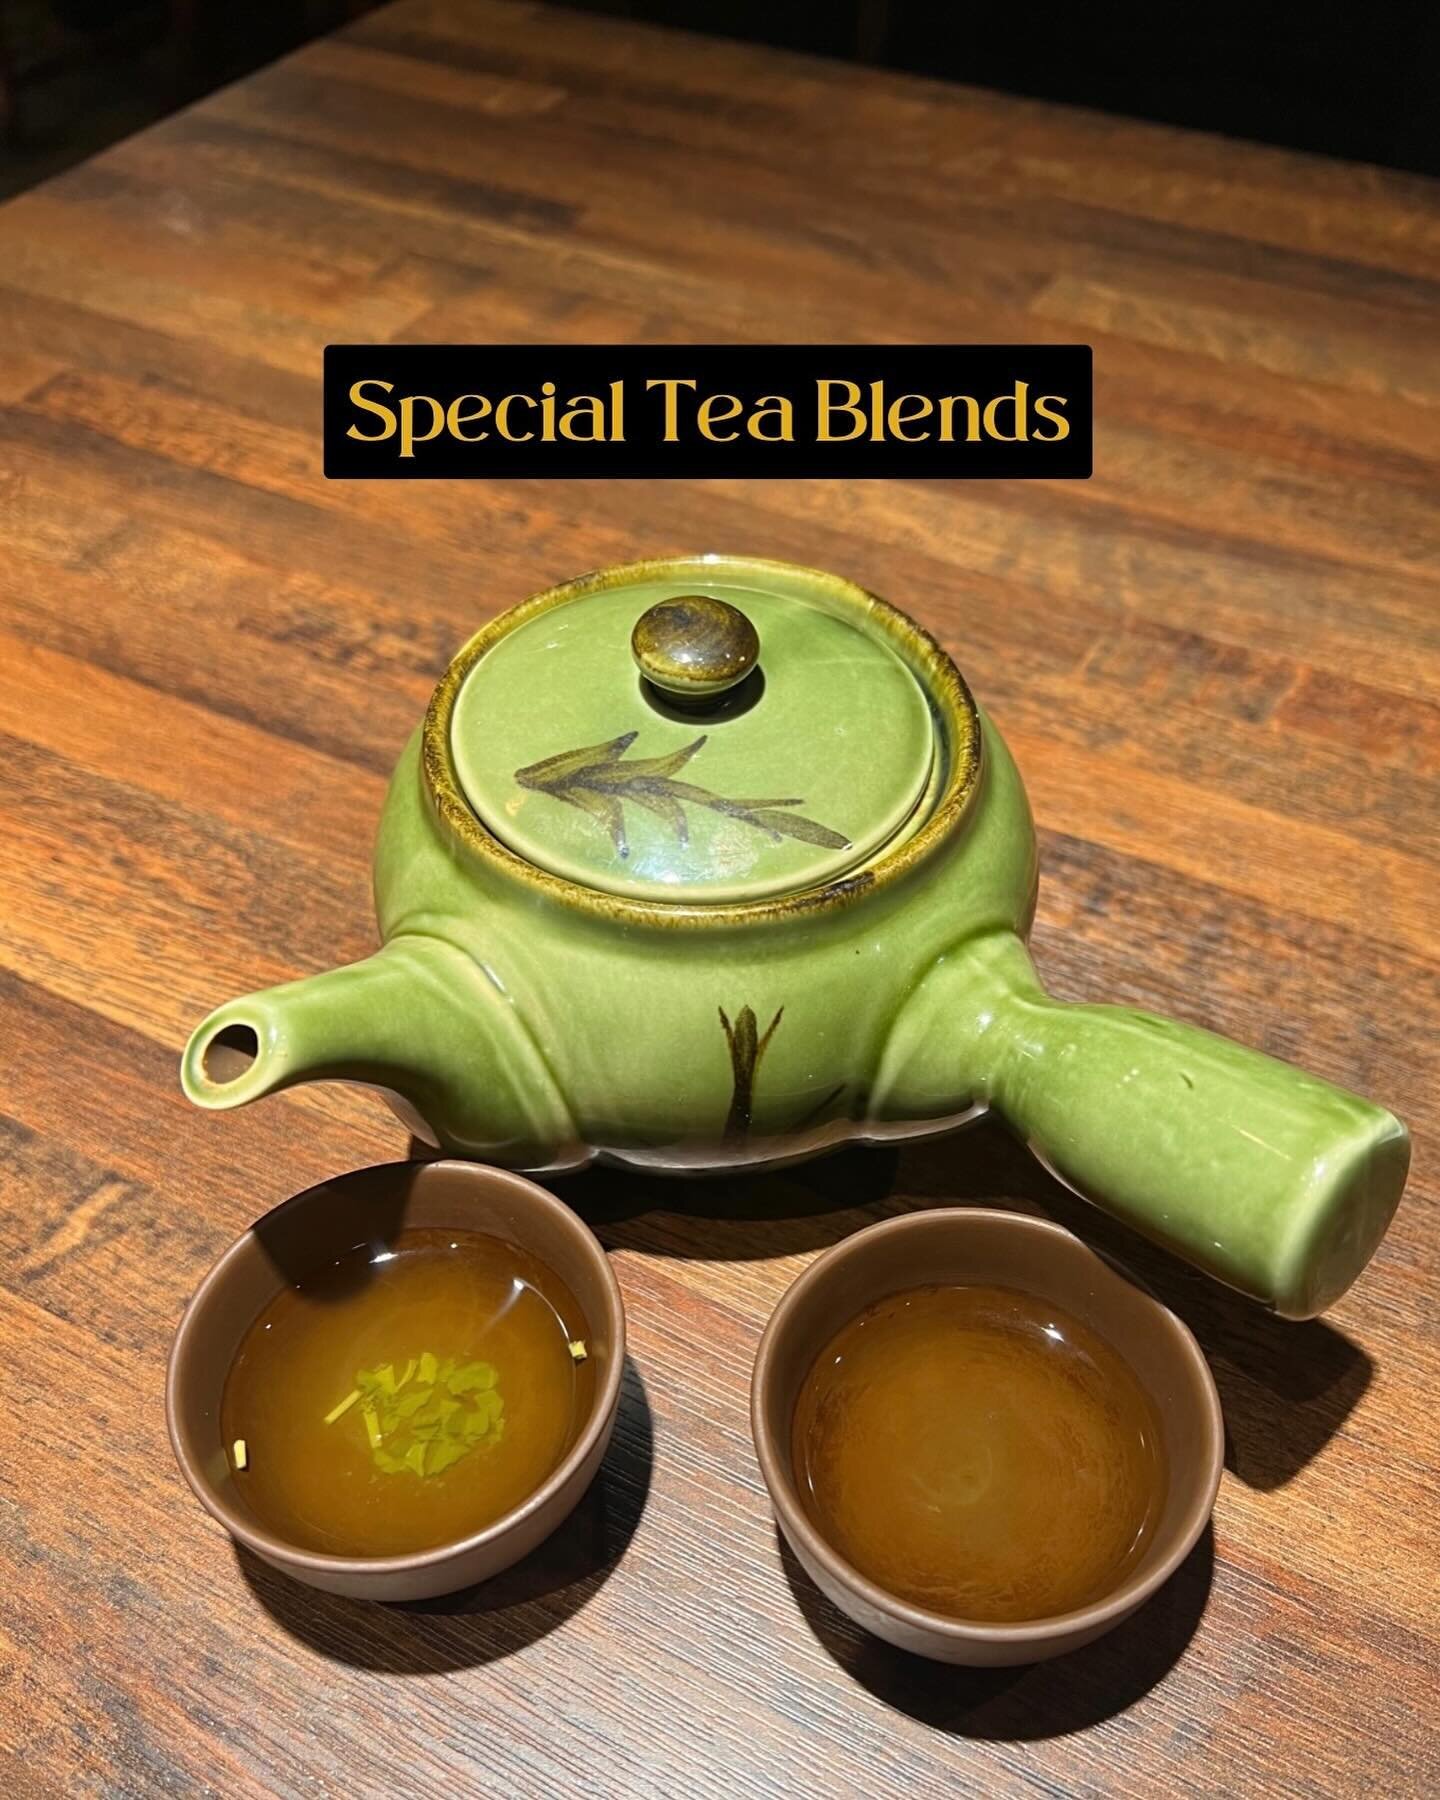 This week&rsquo;s deep dive will be on our exclusive tea blends 🍵

YEN offers three different blends of Japanese tea from a popular Montr&eacute;al tea brand Camellia Sinensis. They are a perfect way to finish your dinner experience at Yen ✨🍵

Our 